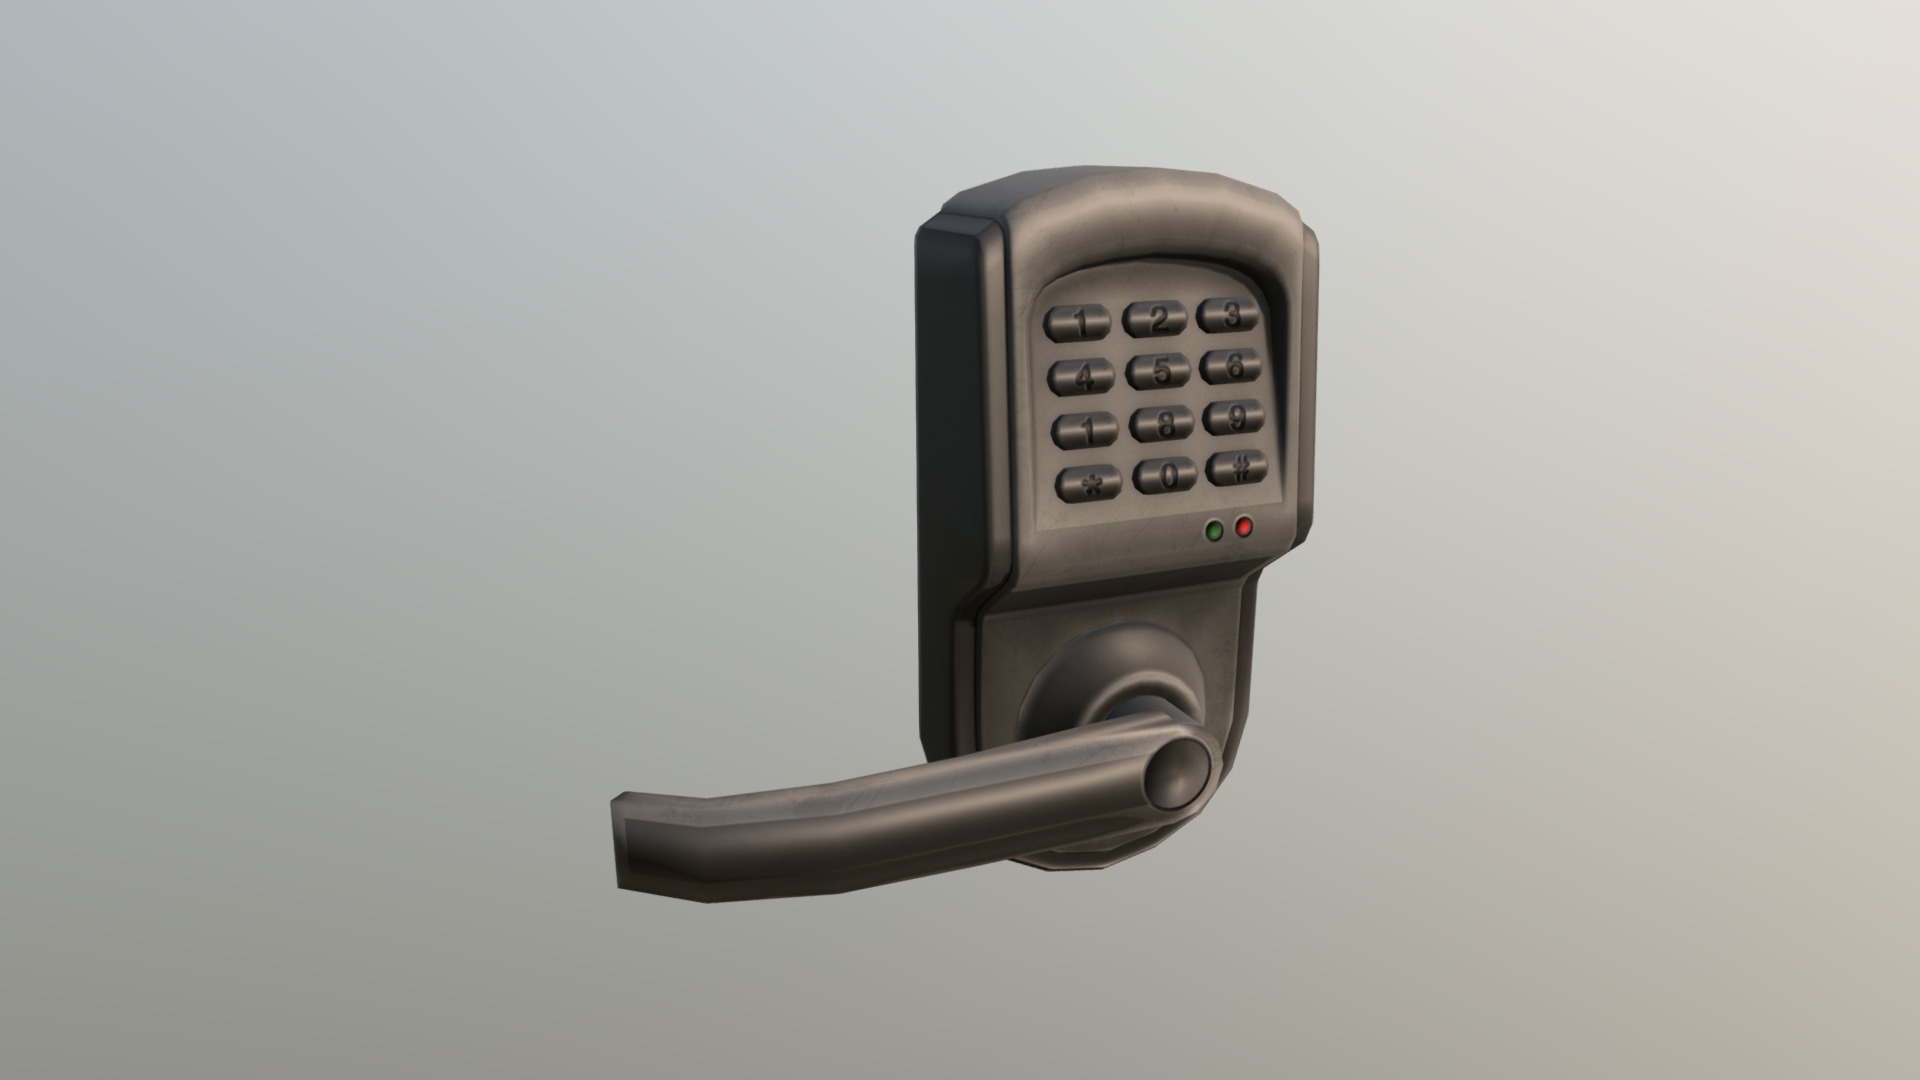 3D model Low Poly Smart Electronic Lock 04 - This is a 3D model of the Low Poly Smart Electronic Lock 04. The 3D model is about a black and silver telephone.